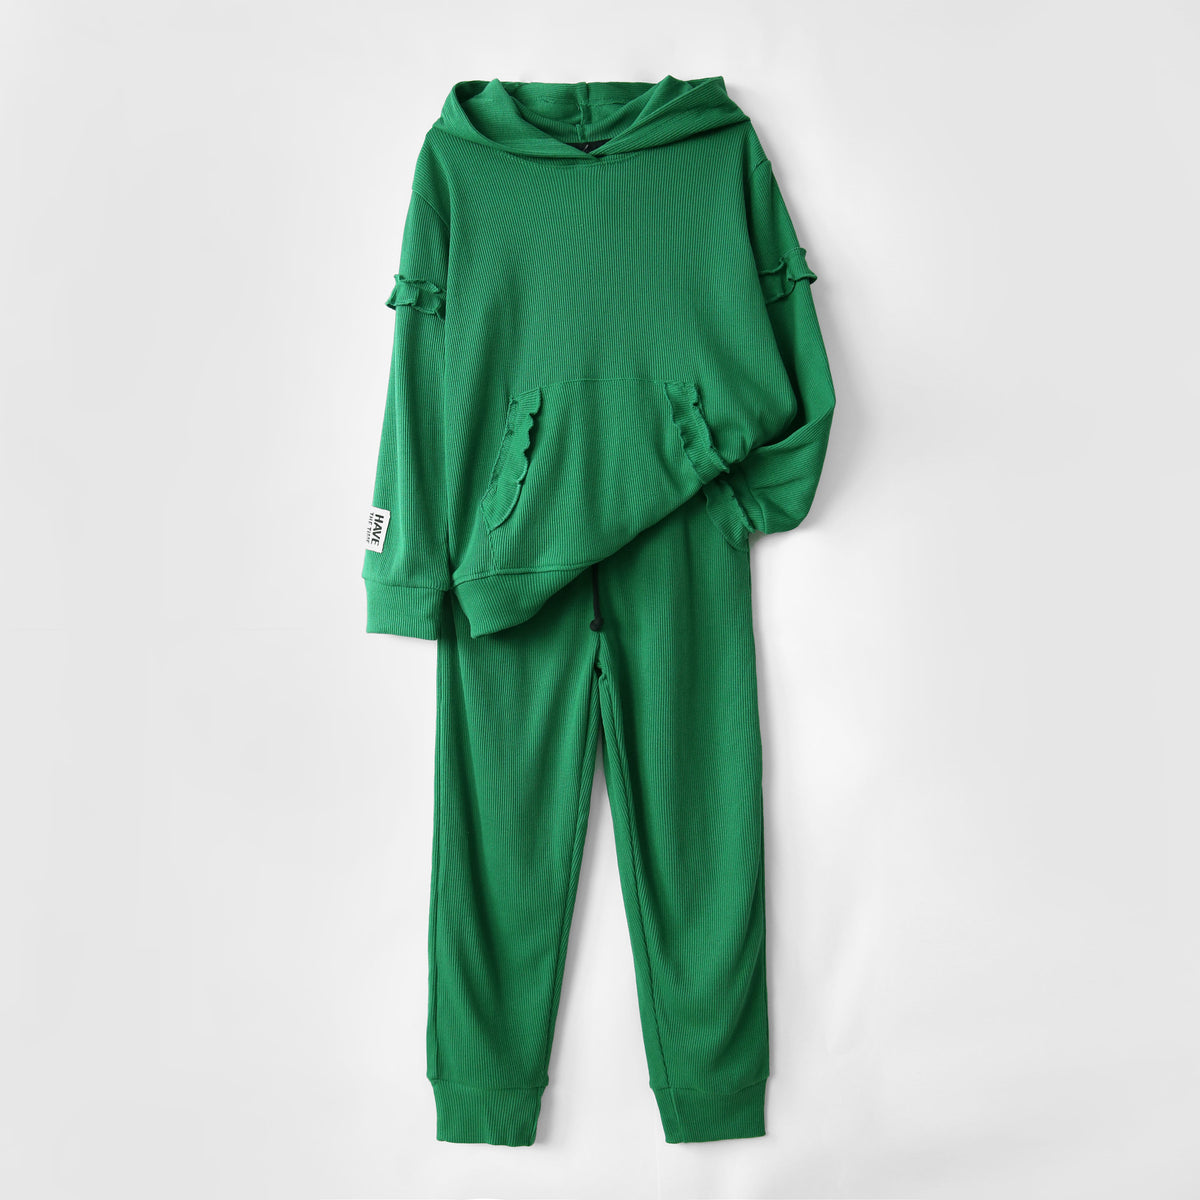 Premium Quality 2 Piece Frill Green Tracksuit For Girls